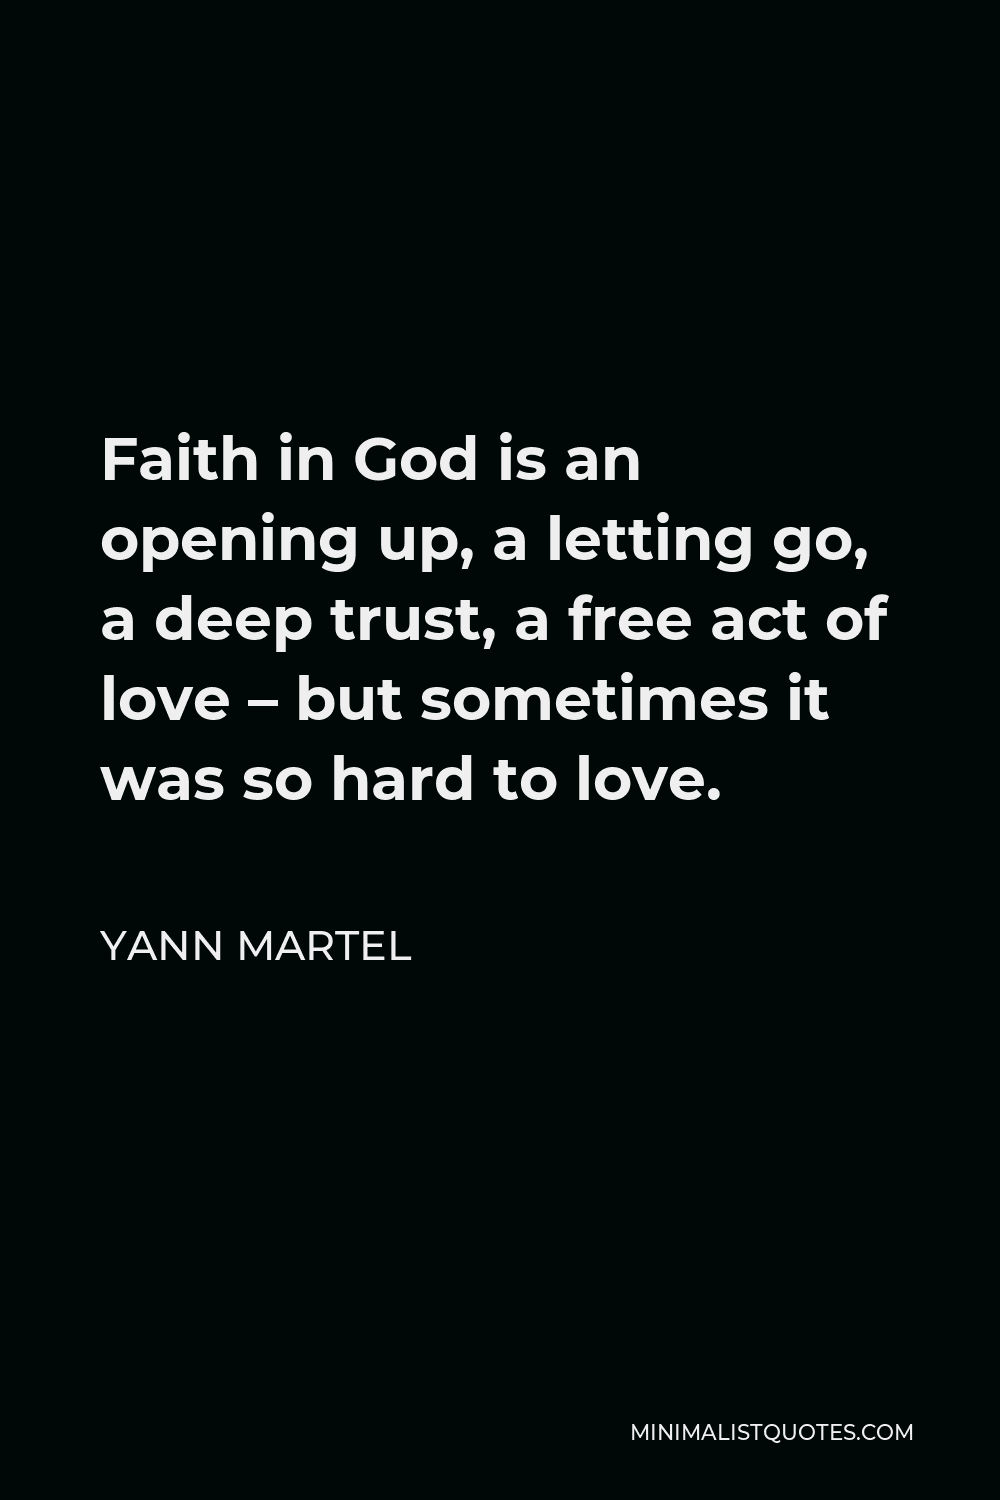 Yann Martel Quote - Faith in God is an opening up, a letting go, a deep trust, a free act of love – but sometimes it was so hard to love.